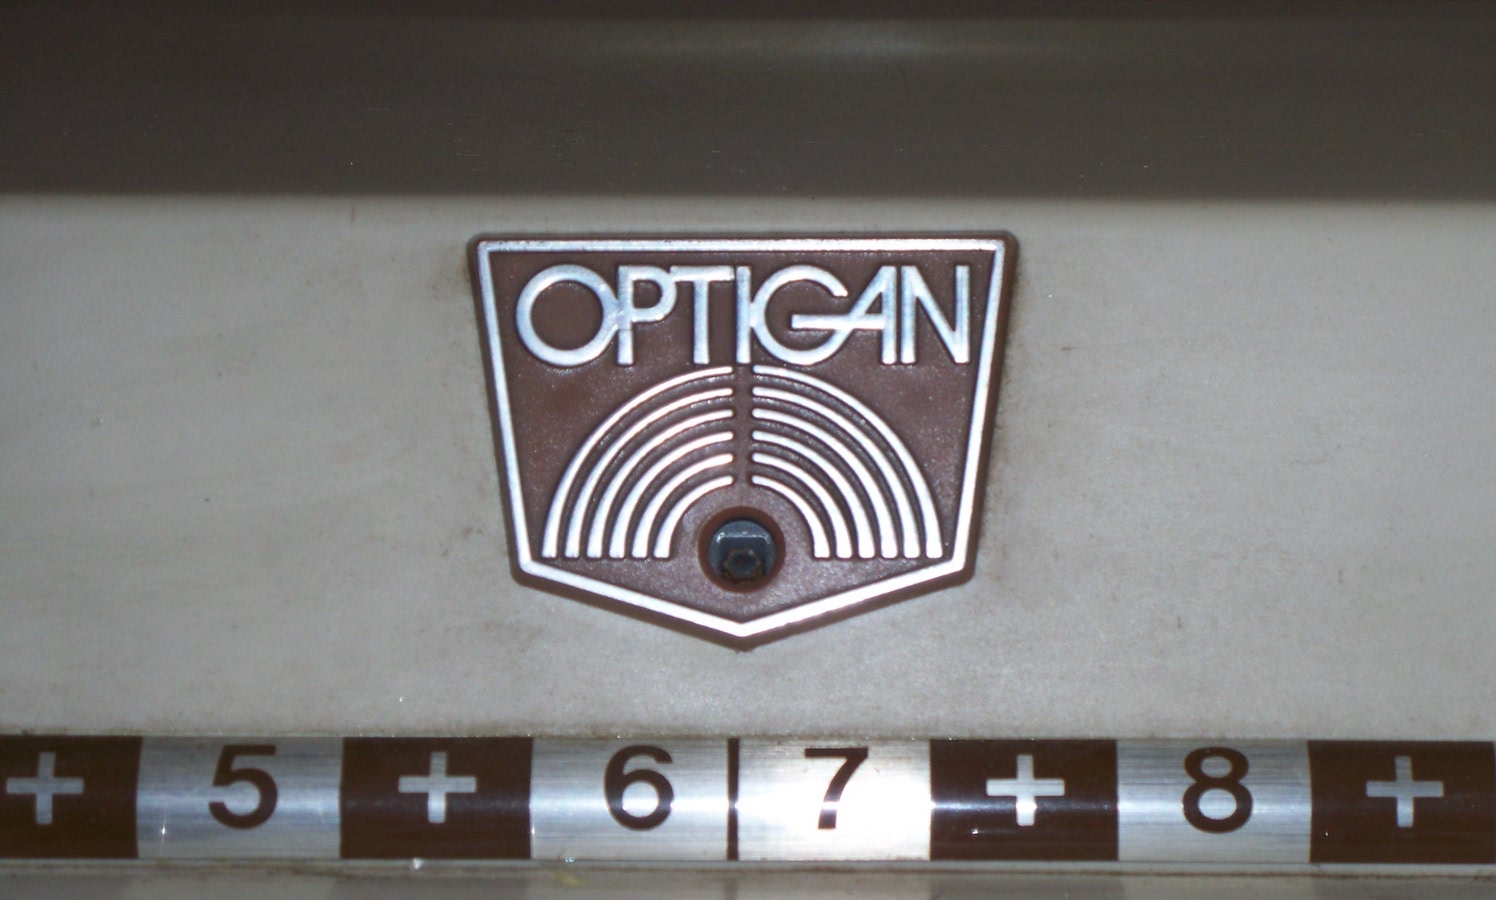 The Optigan metronome by PMDrive1061 used under CC license Creative Commons Attribution-Share Alike 3.0 Unported